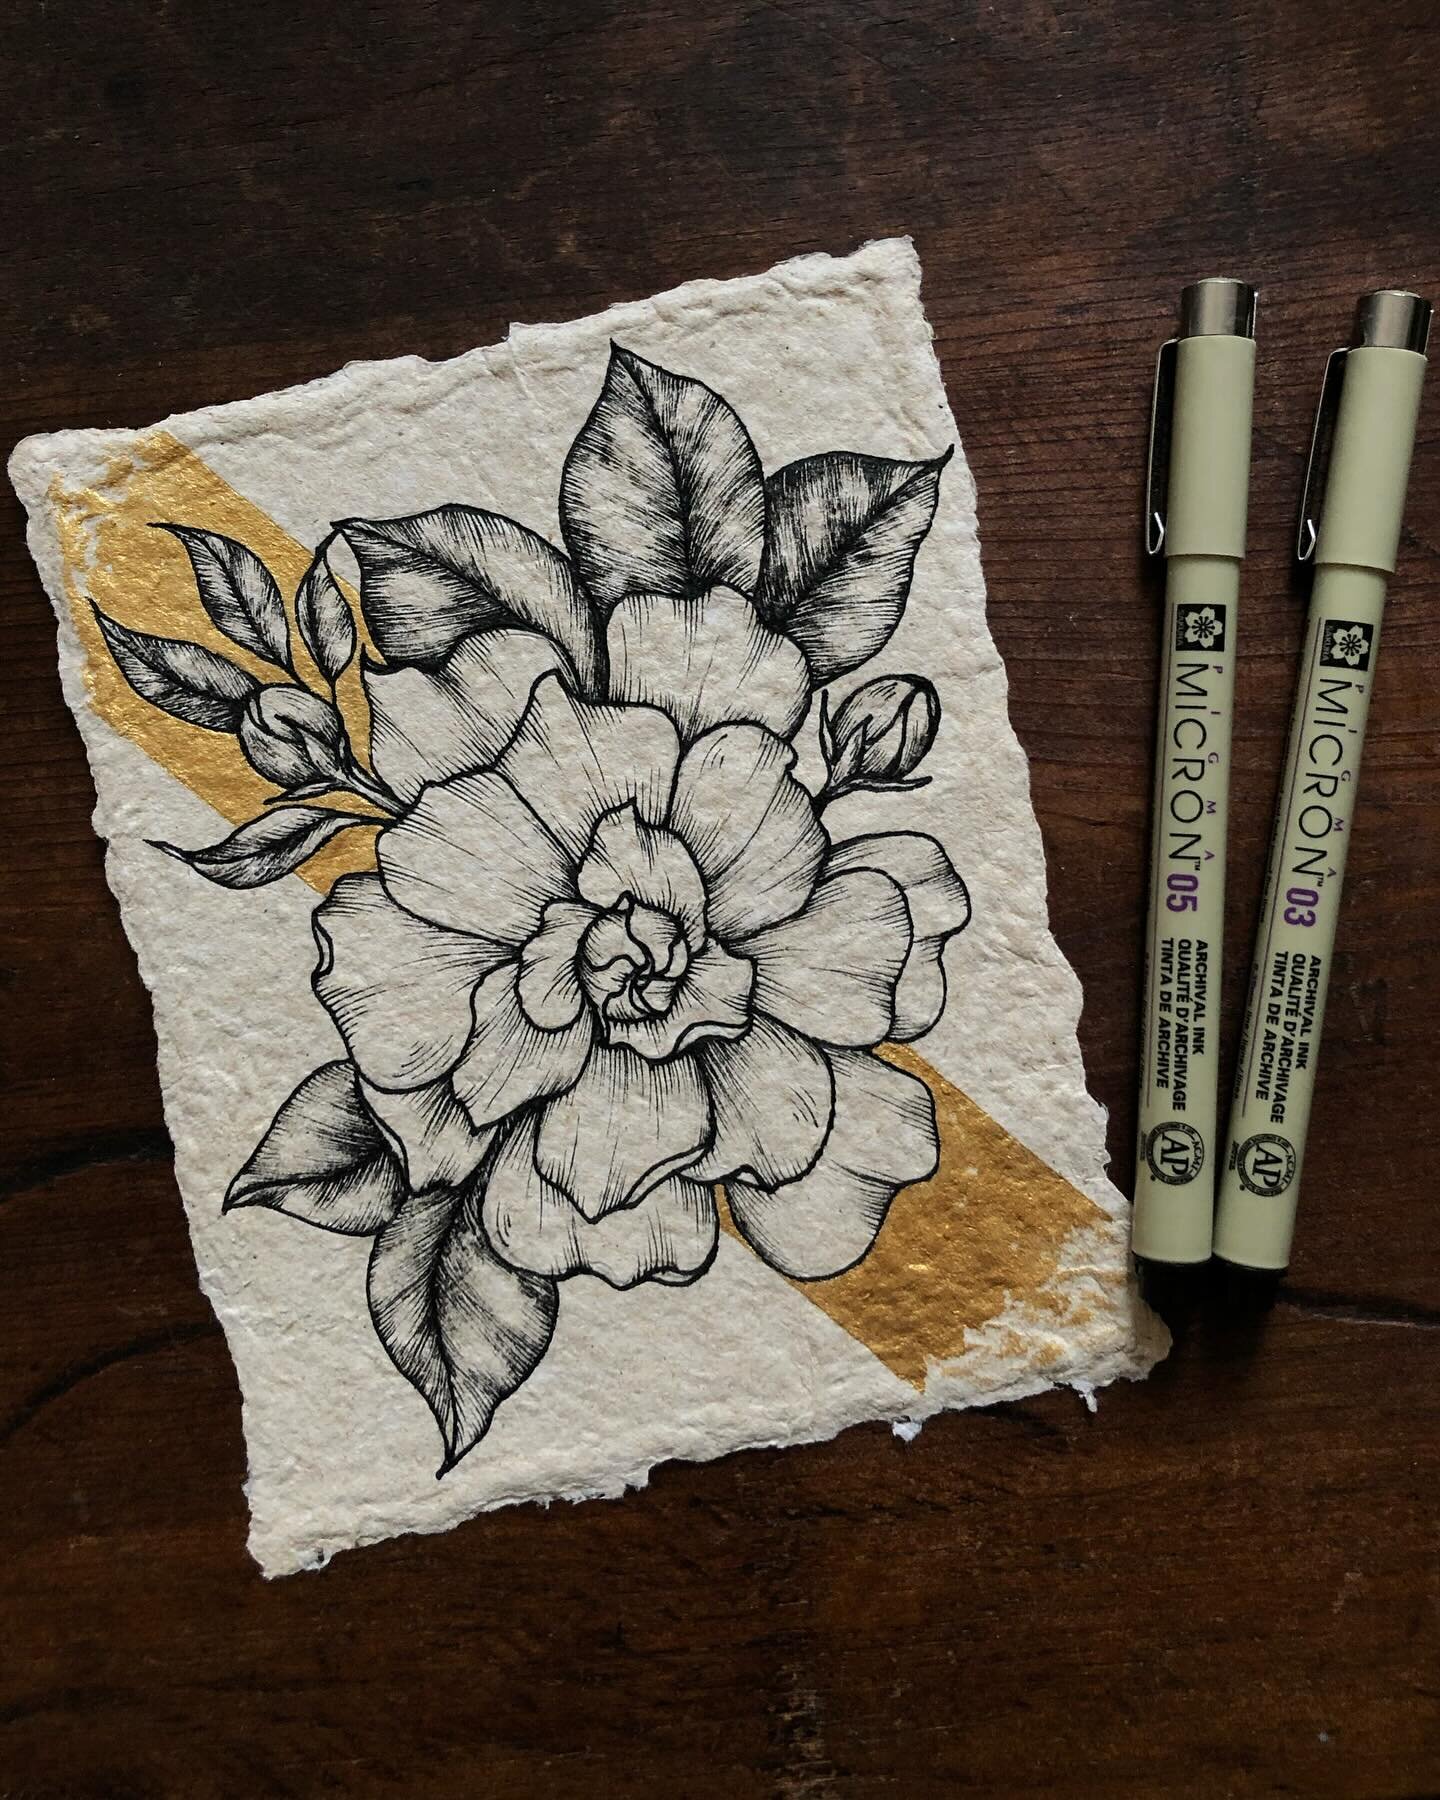 .: Gardenias :. ✍🏼✨
.
Coming from de coffee family &ldquo;Rubiaceae&rdquo;, this Asian beauties are one of the best smelling flowers of all! And one of my personal favourites.

So here&rsquo;s a bunch of gardenias blooming over my handmade paper on 